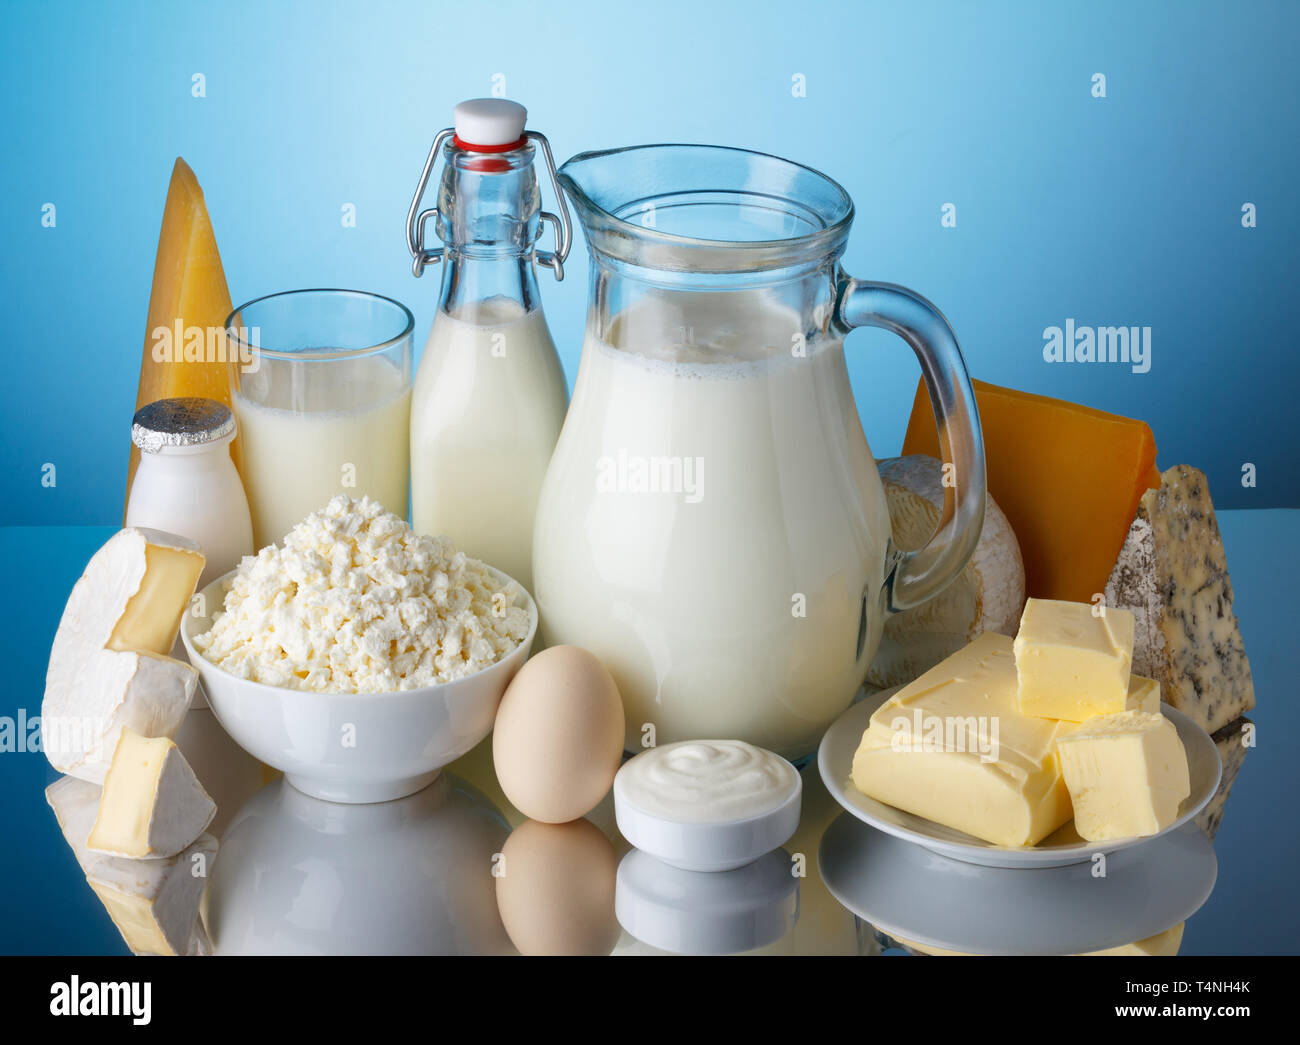 Dairy products, milk, cheese, egg, yogurt, sour cream, cottage cheese and butter on blue background still life Stock Photo